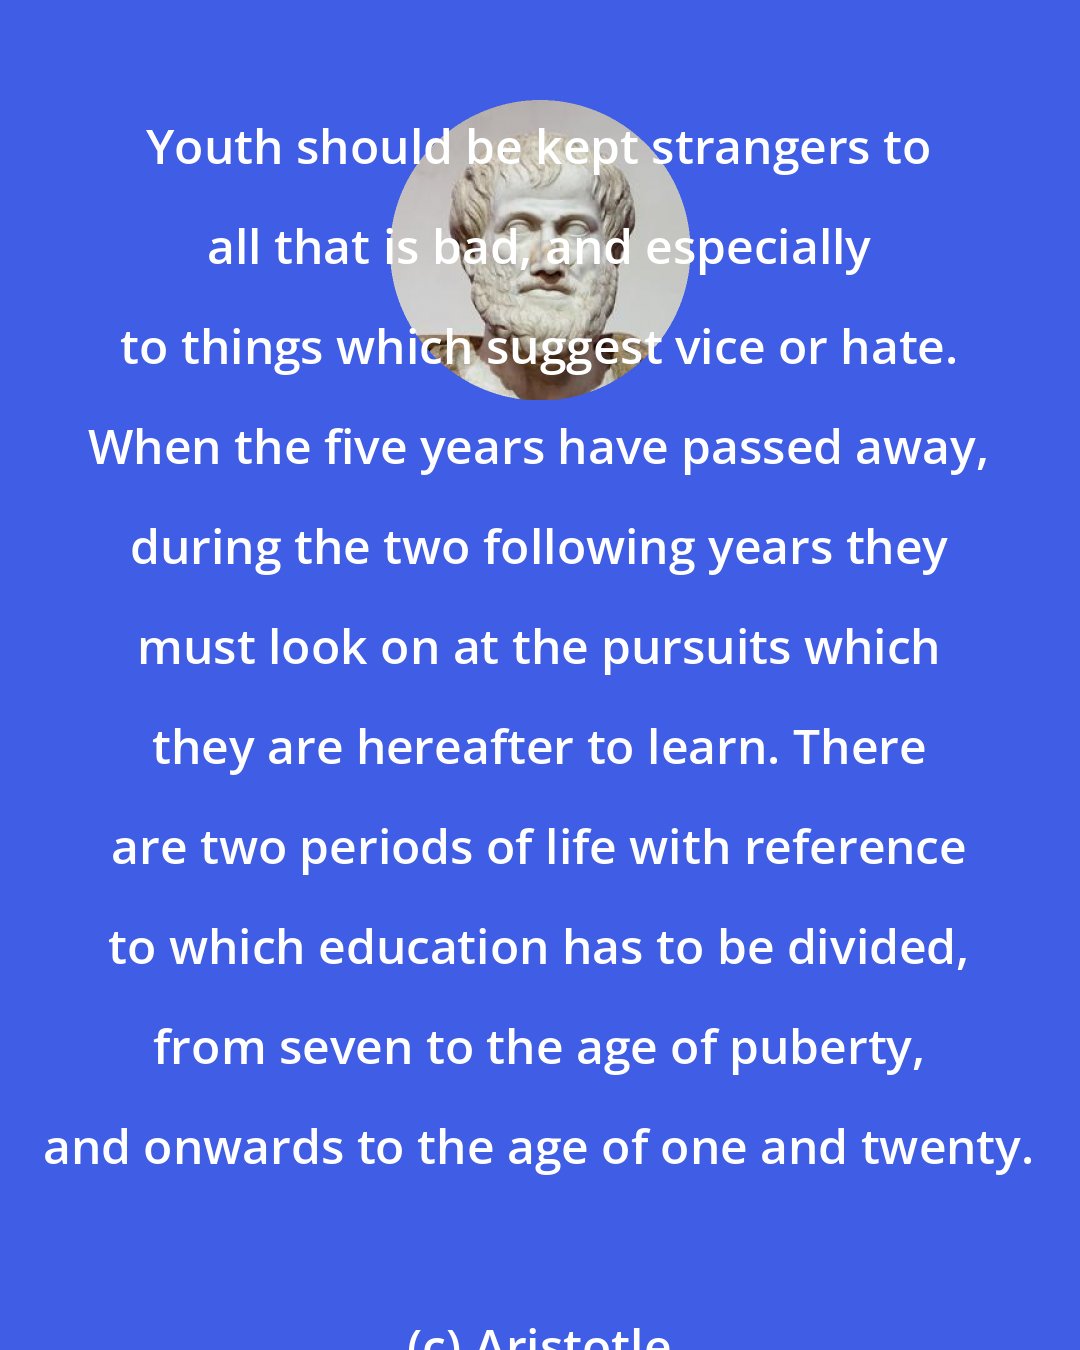 Aristotle: Youth should be kept strangers to all that is bad, and especially to things which suggest vice or hate. When the five years have passed away, during the two following years they must look on at the pursuits which they are hereafter to learn. There are two periods of life with reference to which education has to be divided, from seven to the age of puberty, and onwards to the age of one and twenty.